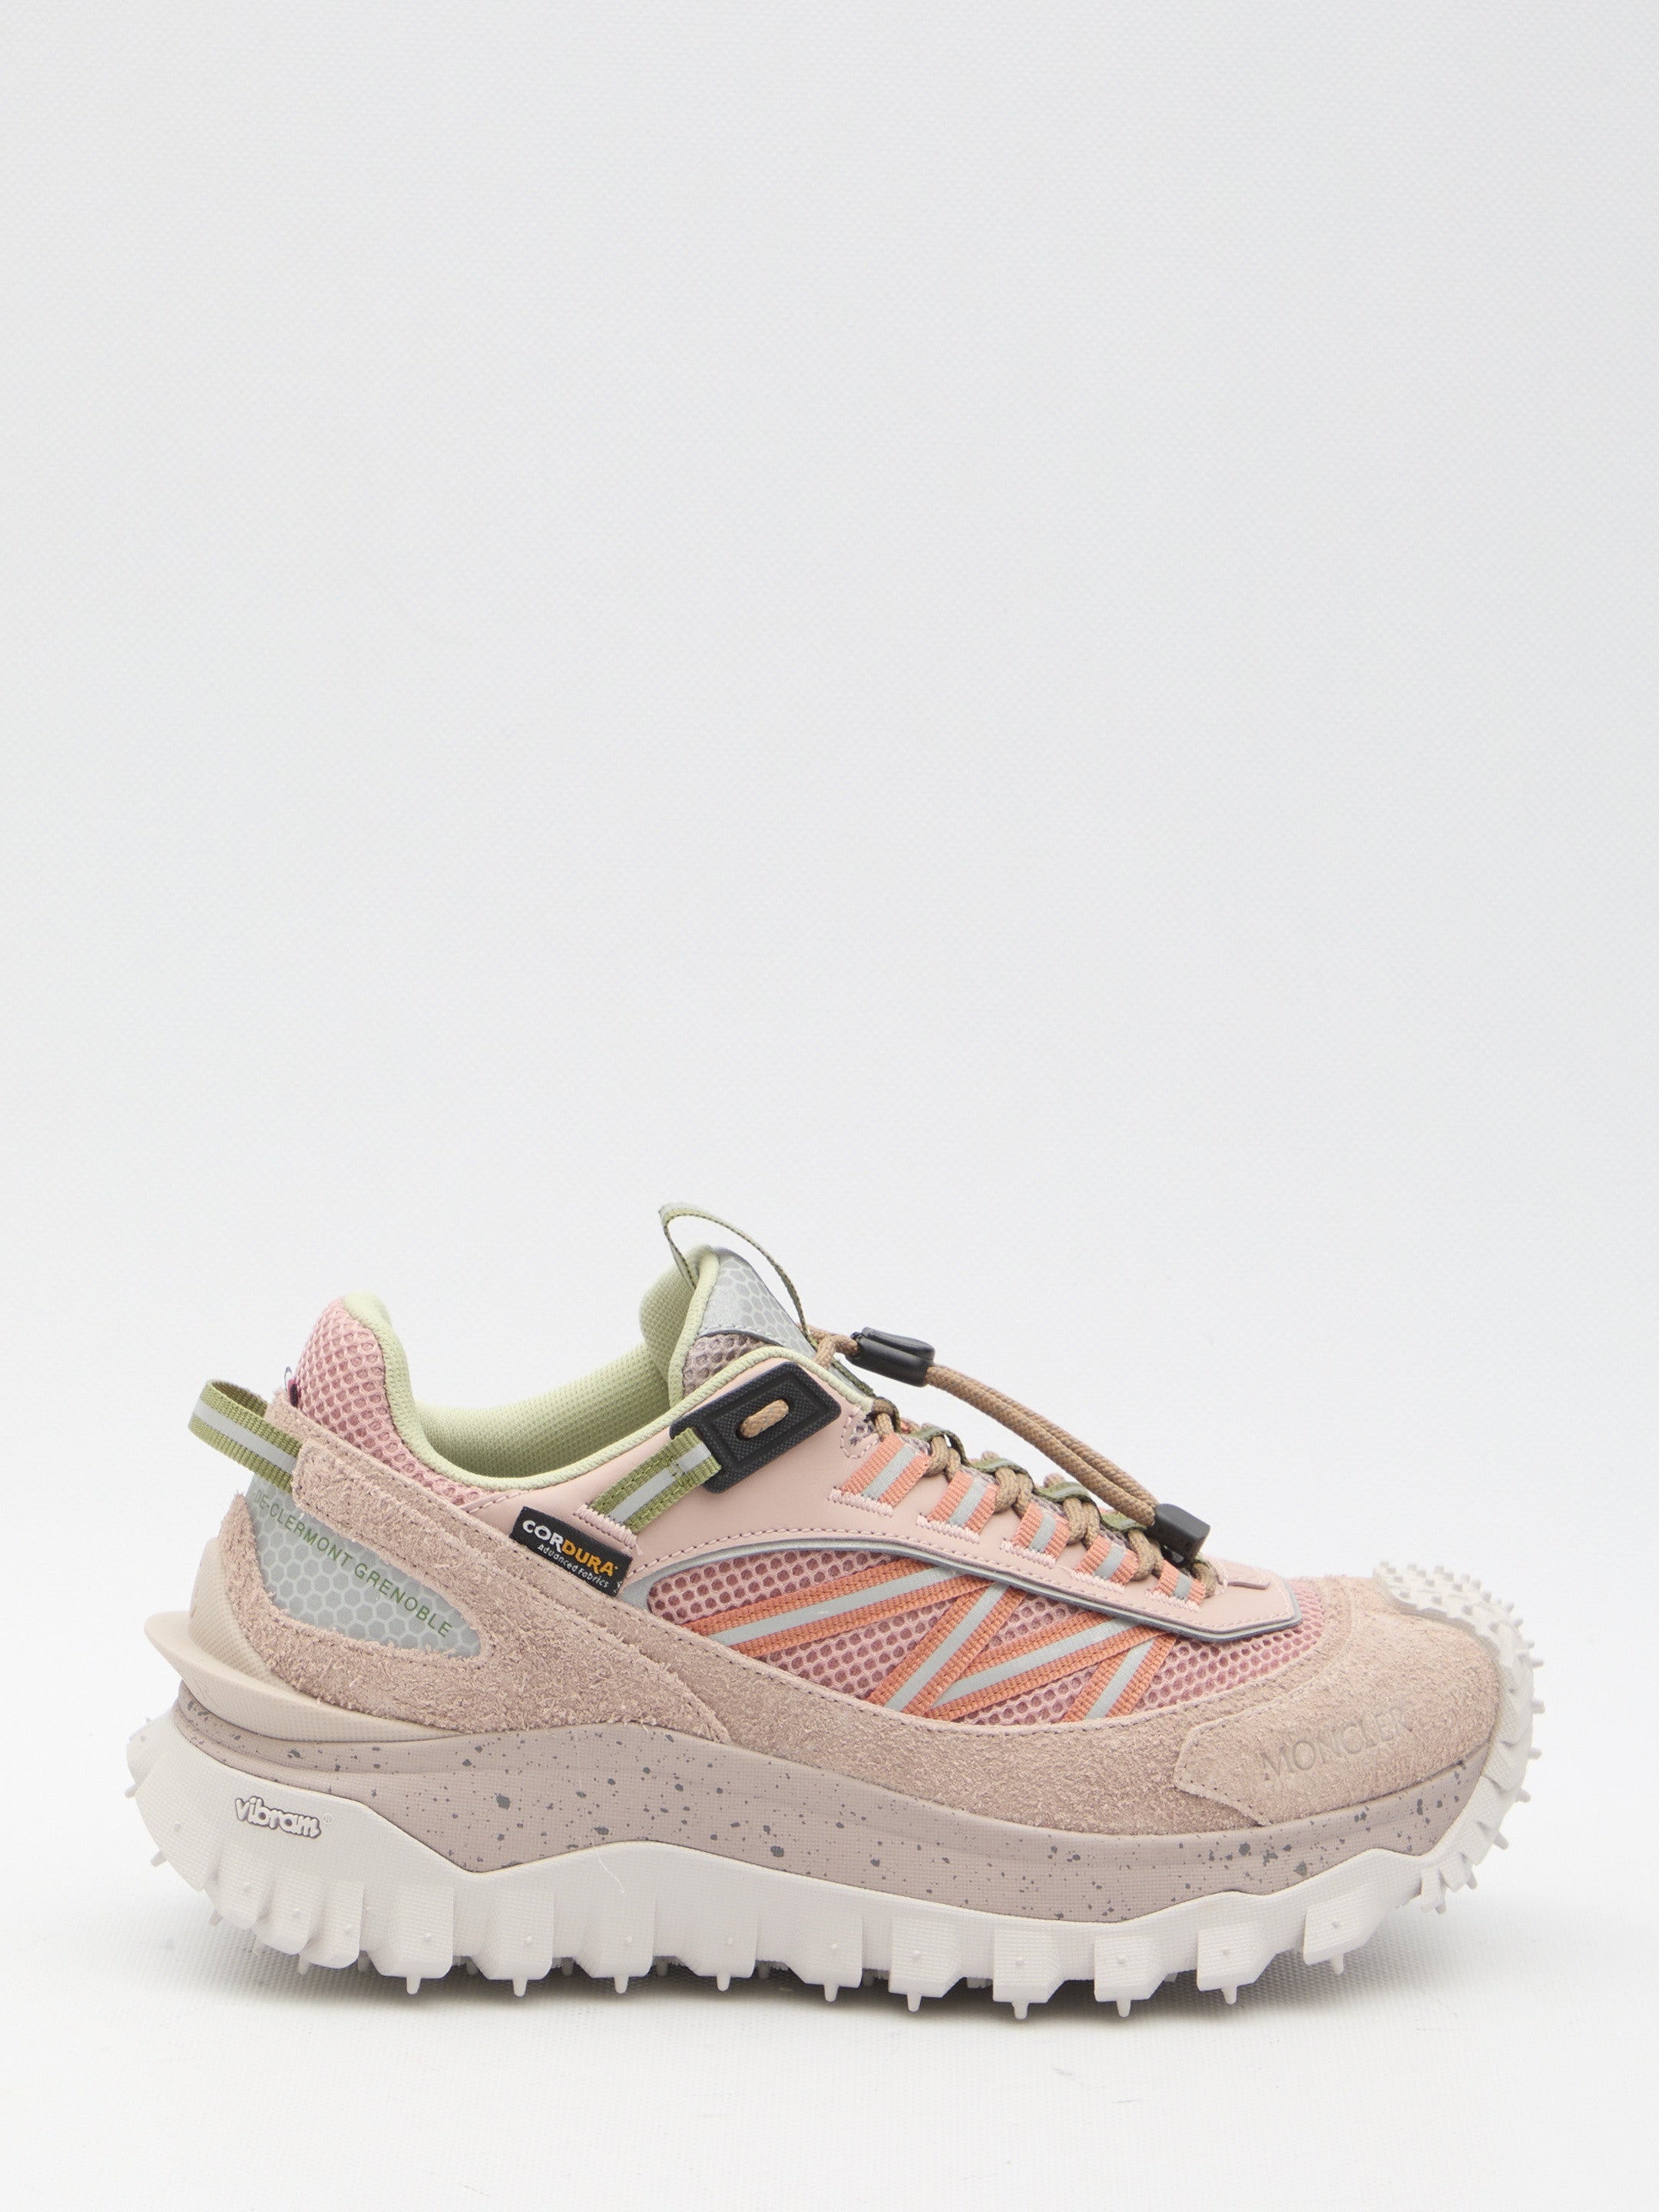 MONCLER-OUTLET-SALE-Trailgrip-sneakers-Sneakers-36-PINK-ARCHIVE-COLLECTION.jpg